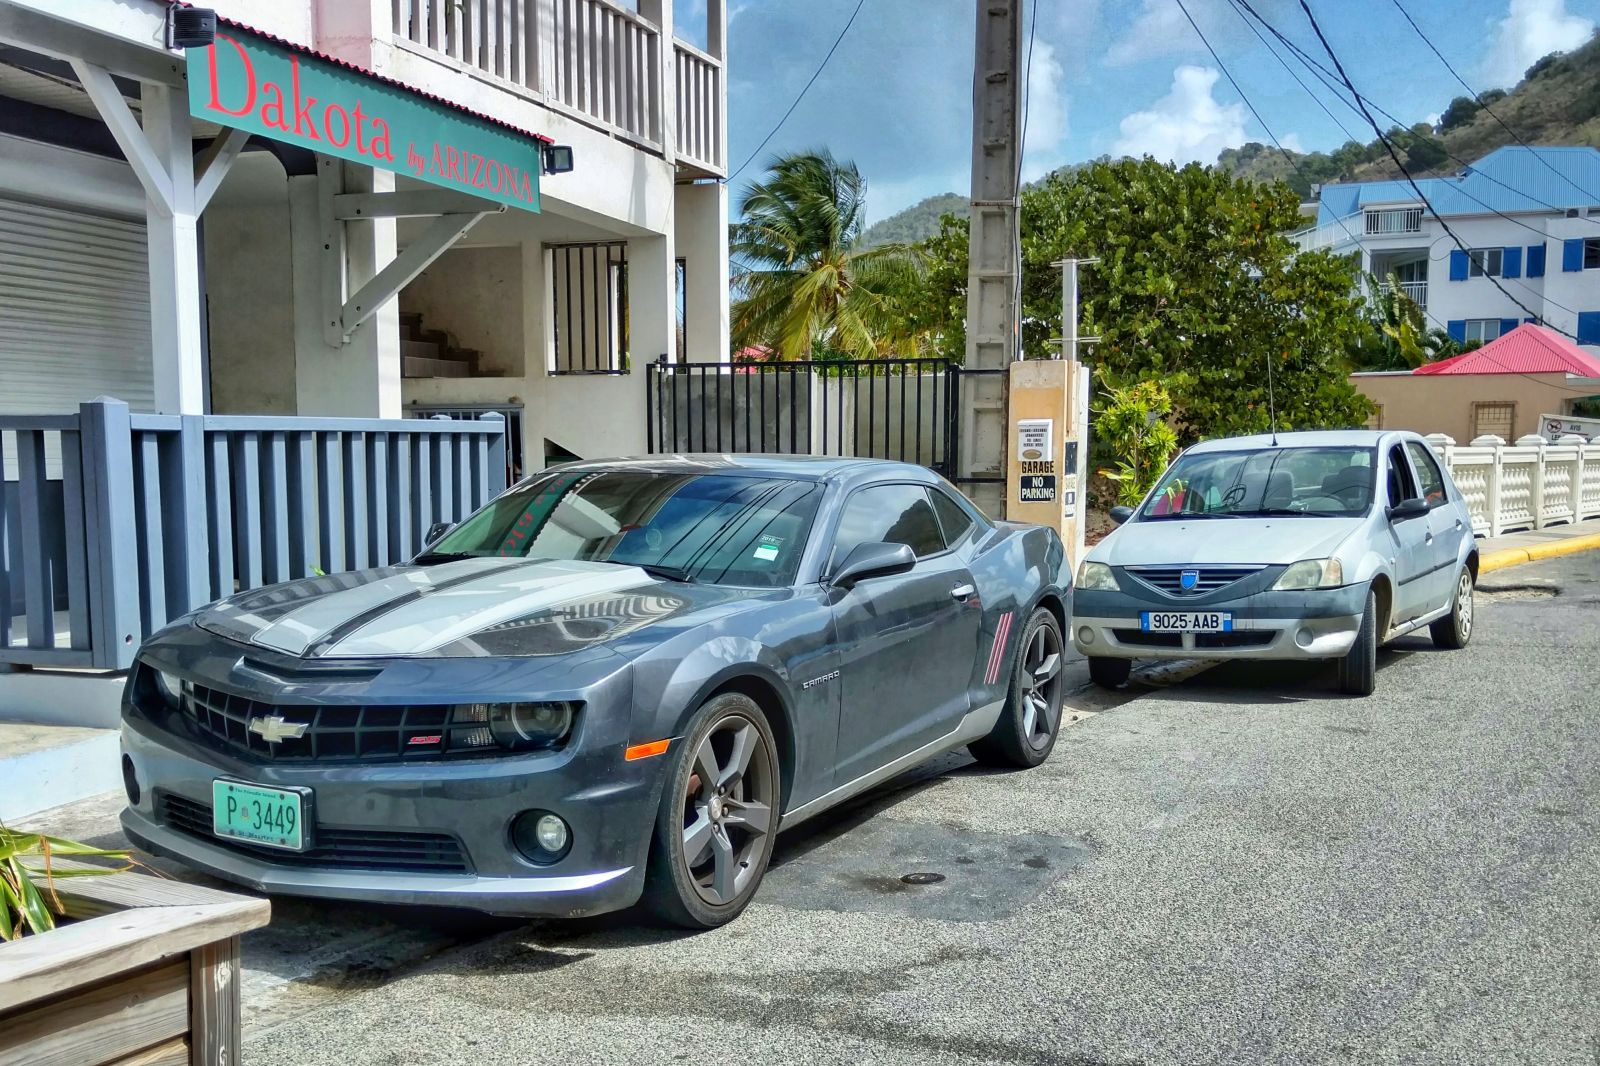 Illustration for article titled Saint Martin might be the only place in the world you can see a Camaro and a Dacia Logan together